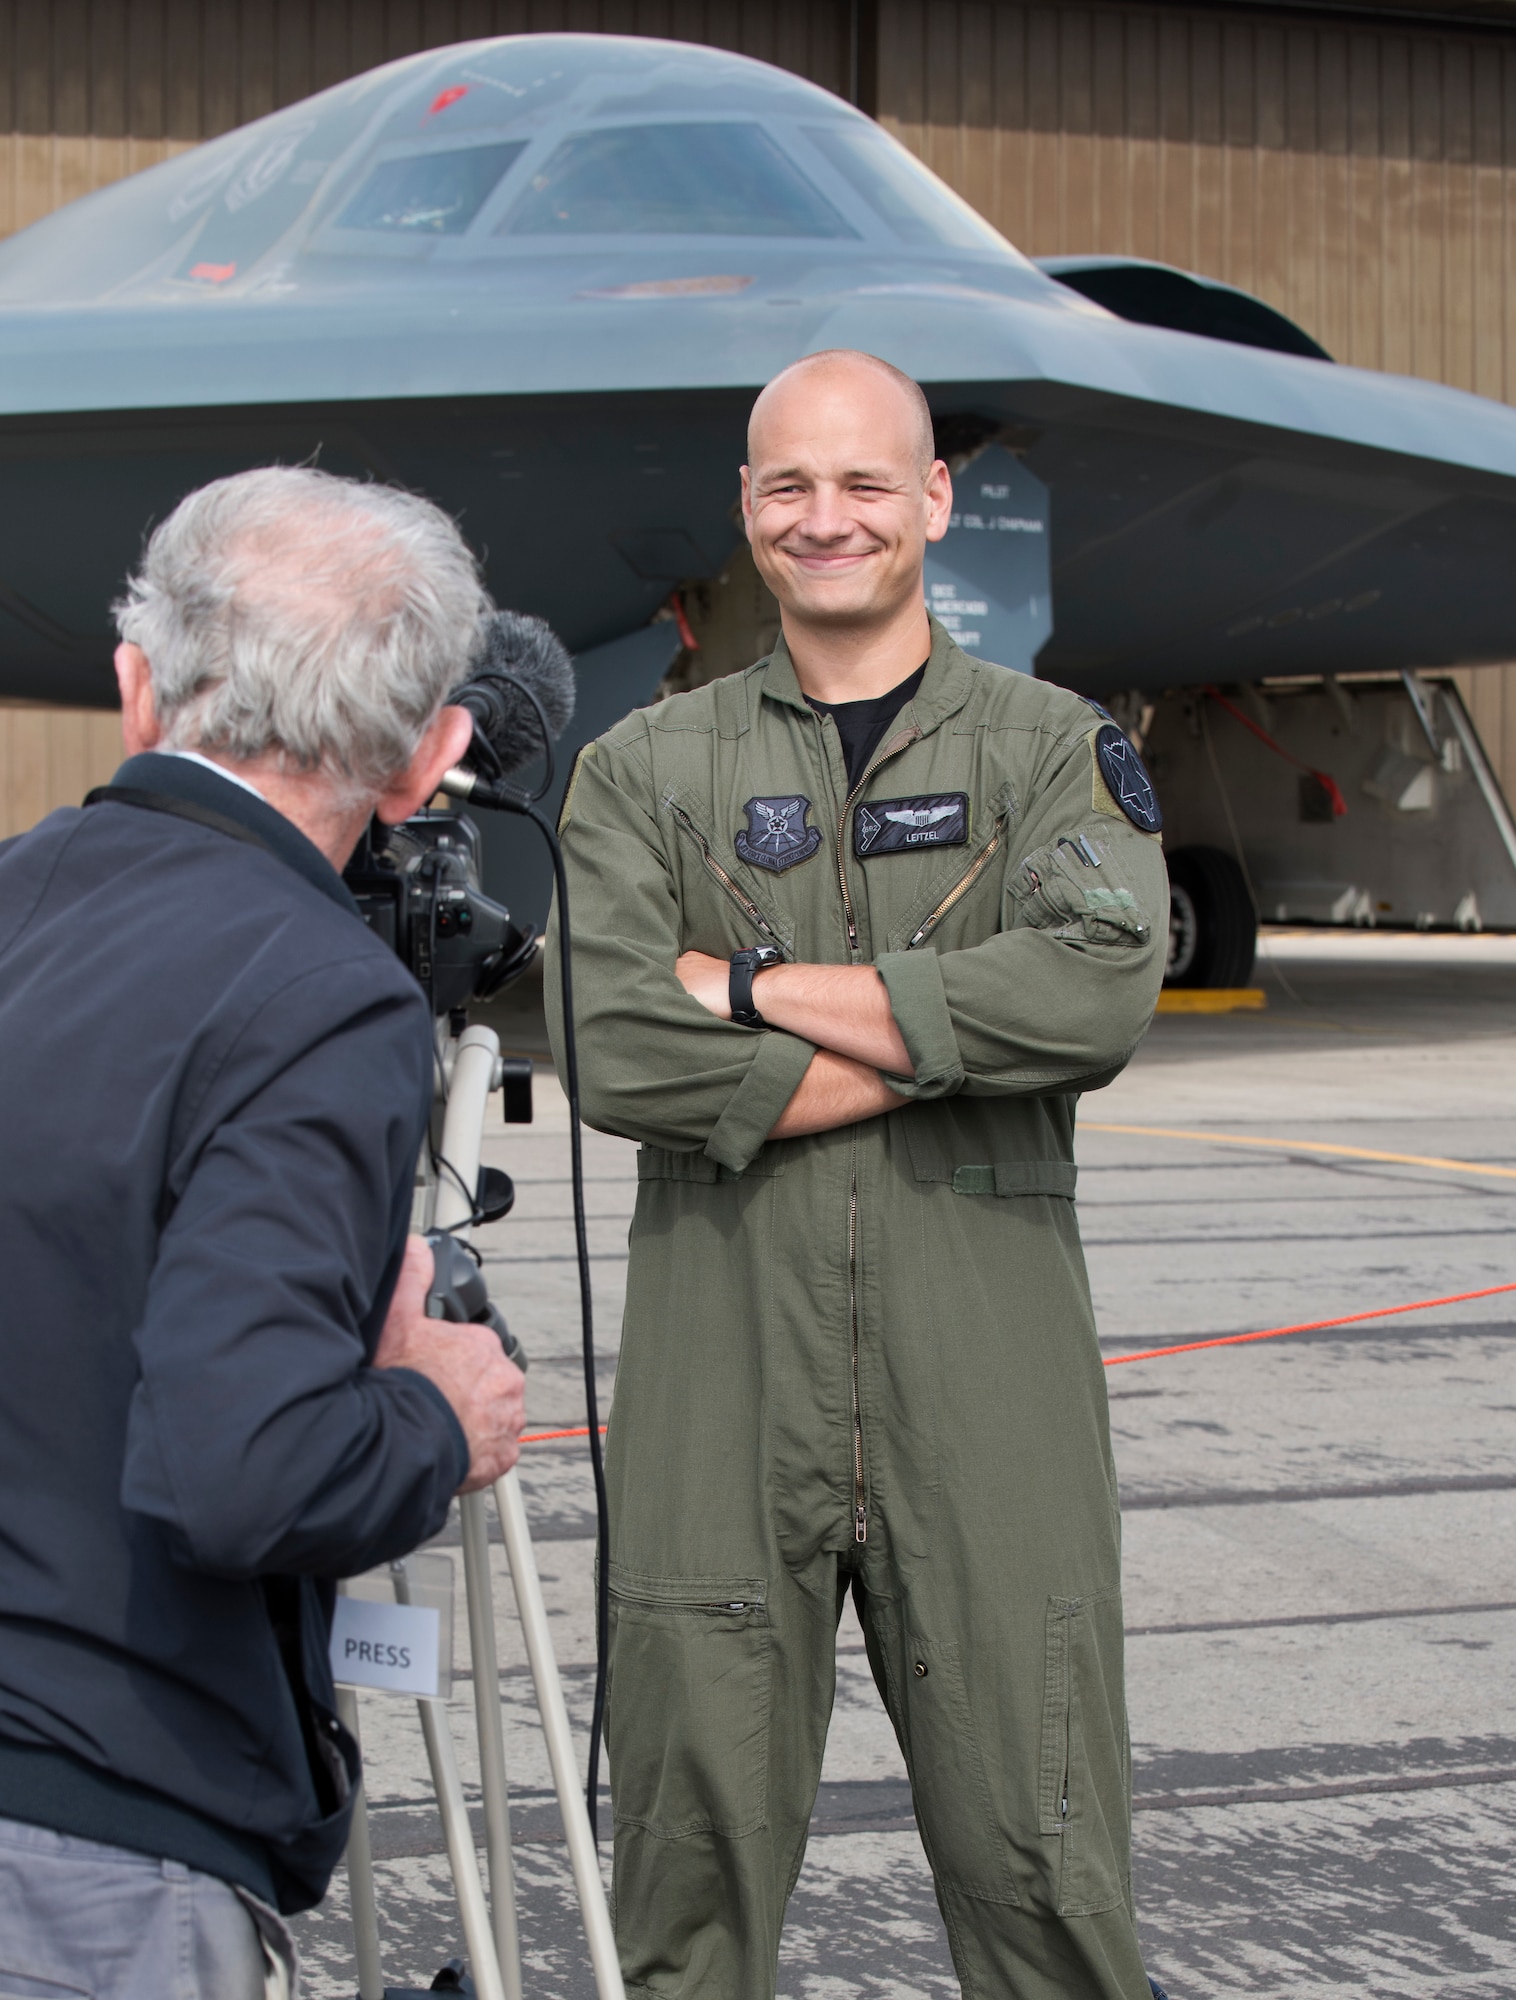 Captain Erik Leitzel, a B-2 Spirit pilot assigned to the 393rd Bomb Squadron at Whiteman Air Force Base, Missouri, stands for an interview with a British journalist on August 30, 2019, at Royal Air Force Fairford, England. Leitzel is a third-generation bomber pilot, following his grandfather and father, two retired Air Force colonels, who also served at or near RAF Fairford during their respective careers. (U.S. Air Force photo by Staff Sergeant Kayla White)